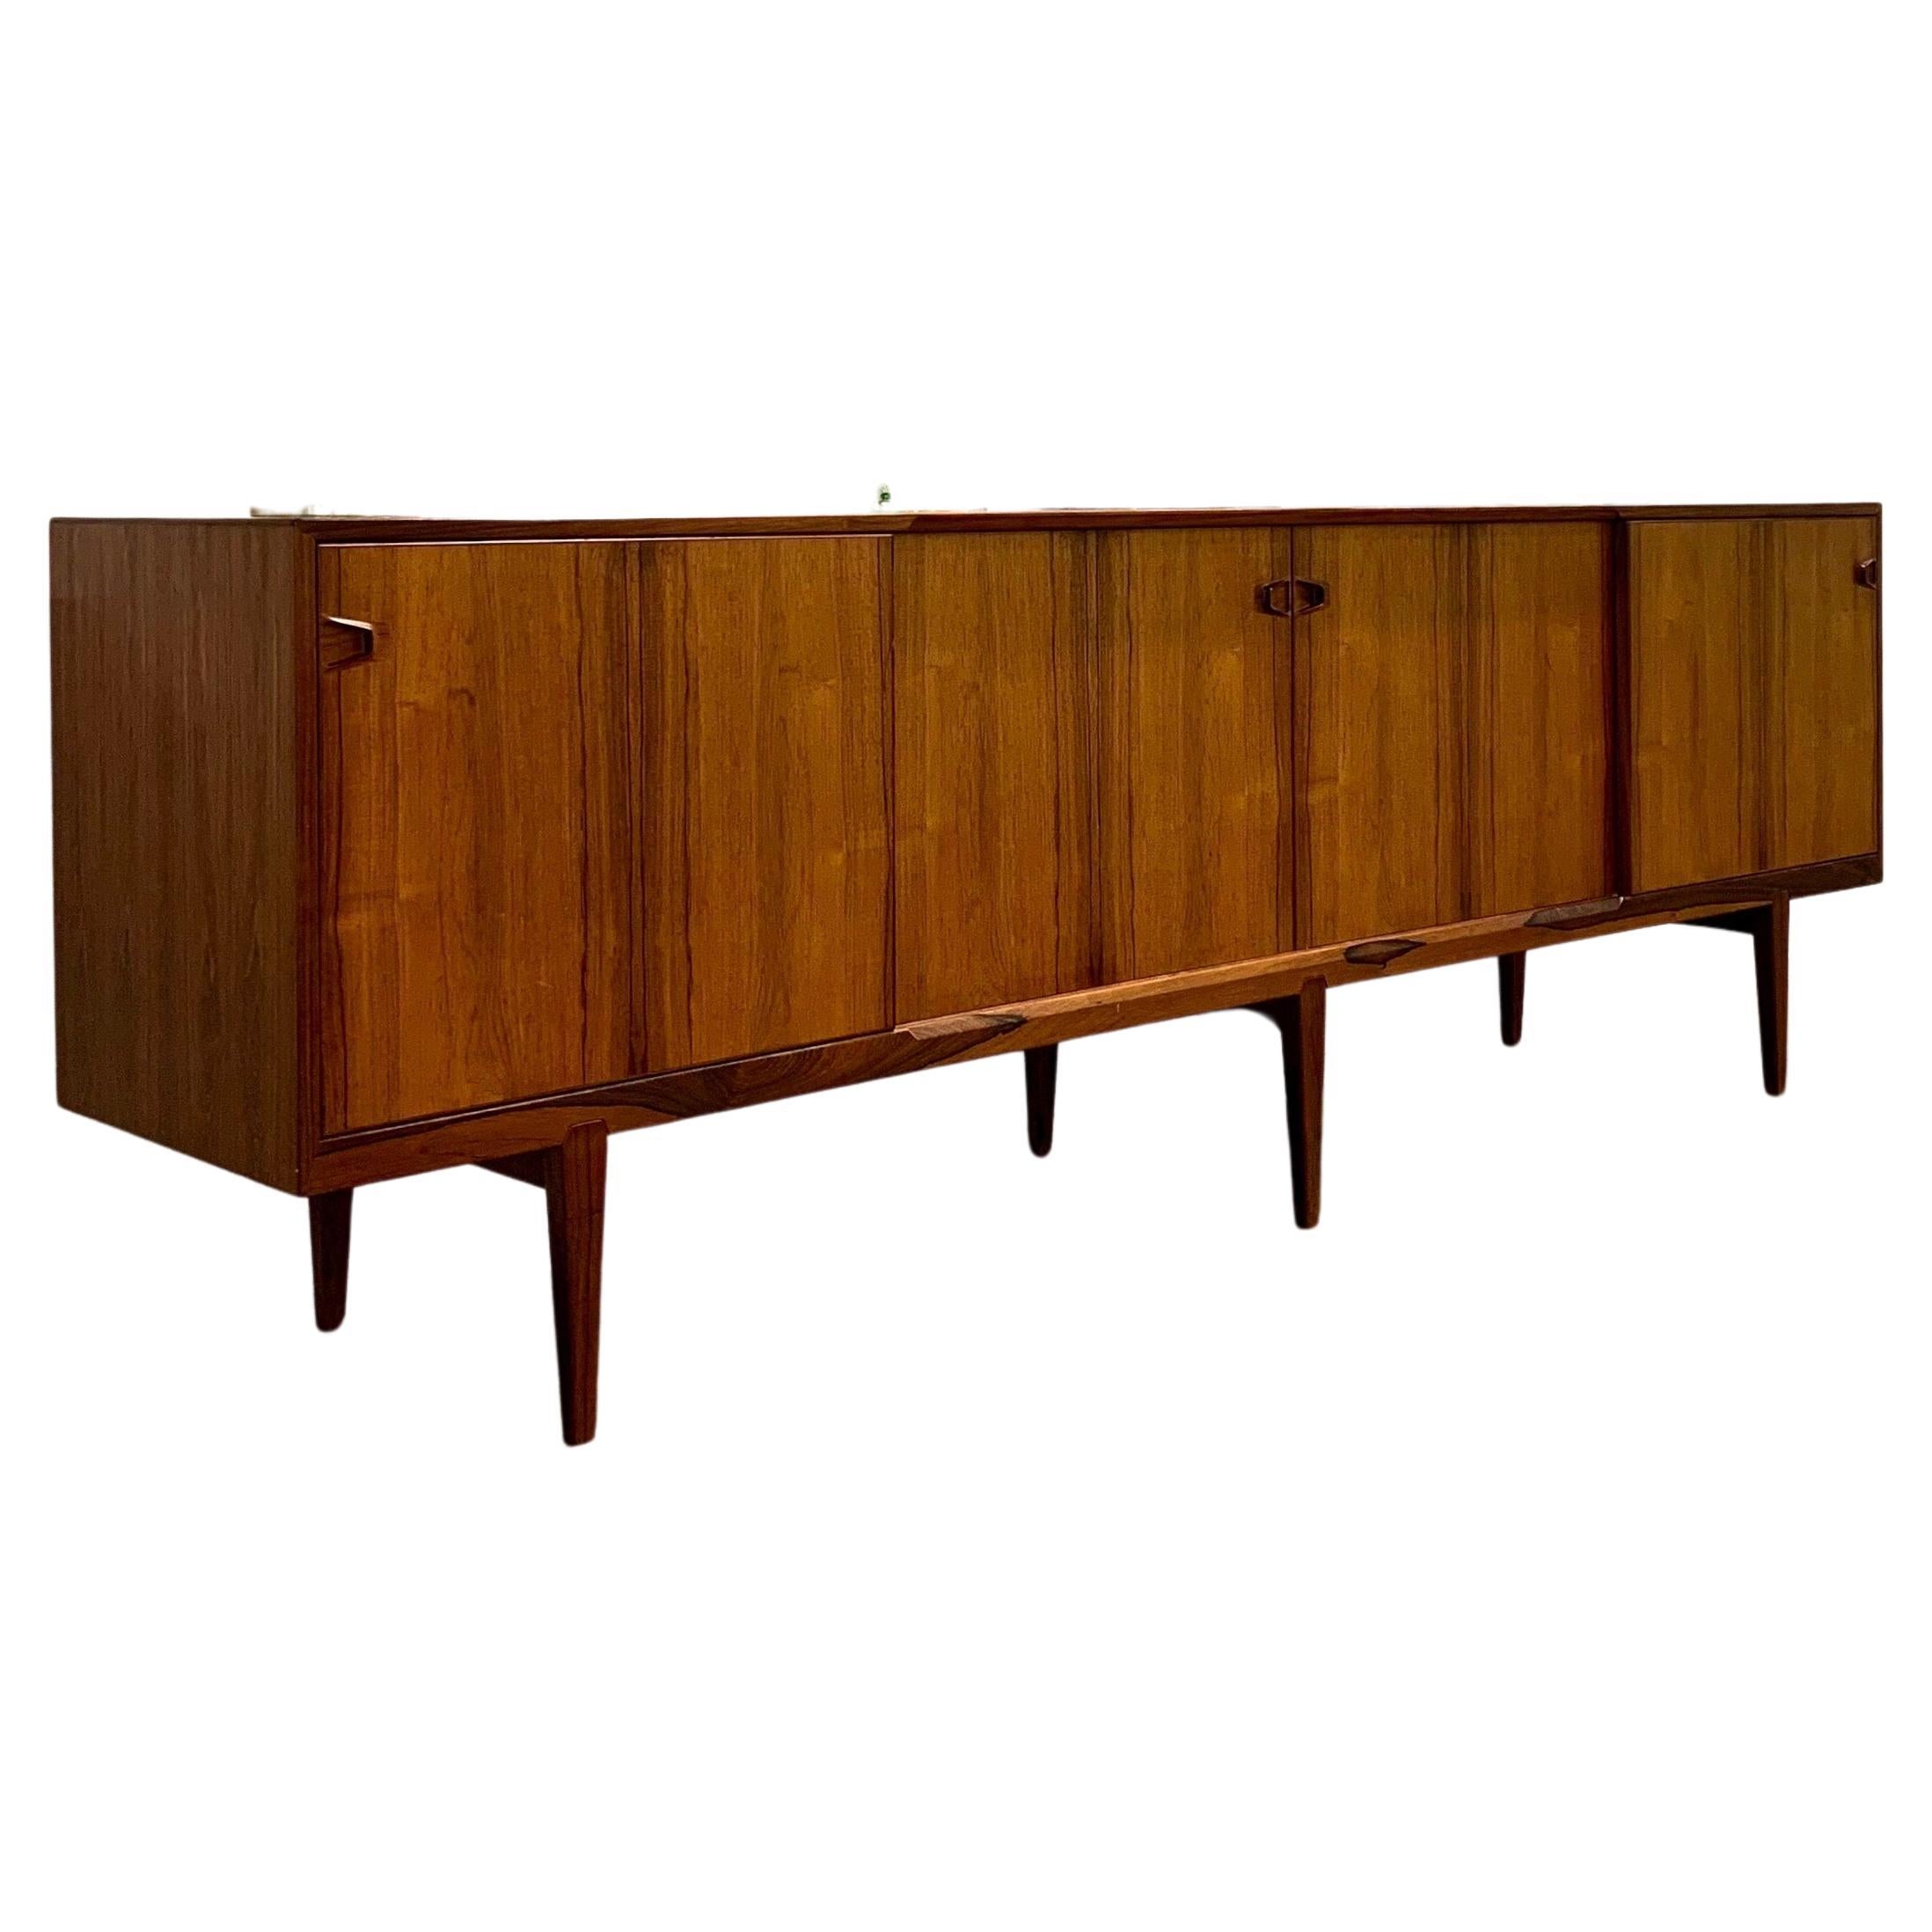 Beautiful rosewood sideboard designed by Henry Rosengren Hansen, model No 49, produced by Brande Møbelindustri in Denmark, 1960s.

This piece has so many well crafted details, the handles alone are sensational. It comes with a five drawers